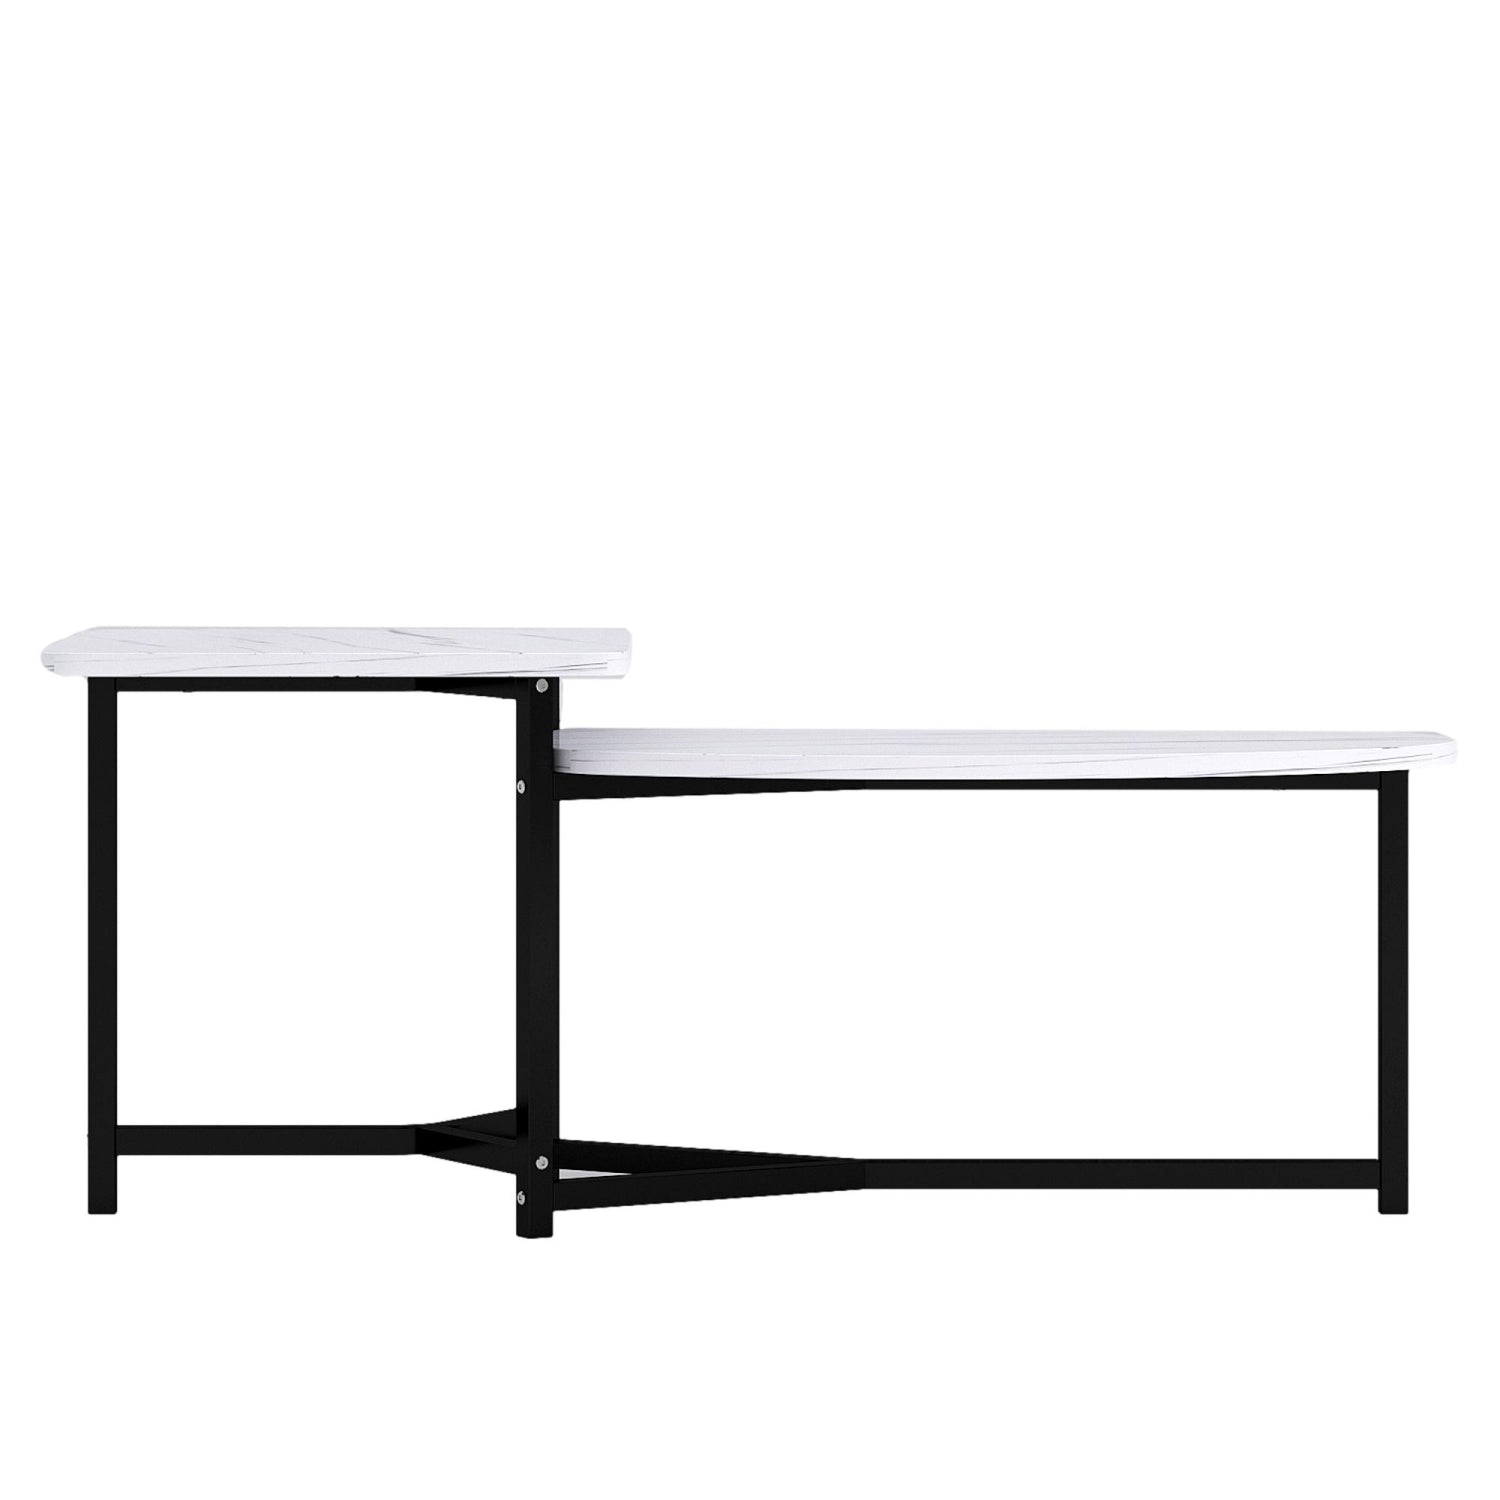 ViscoLogic LUXEM Mid-Century Unique Nested Coffee Table, Center Table For Living Room (White)